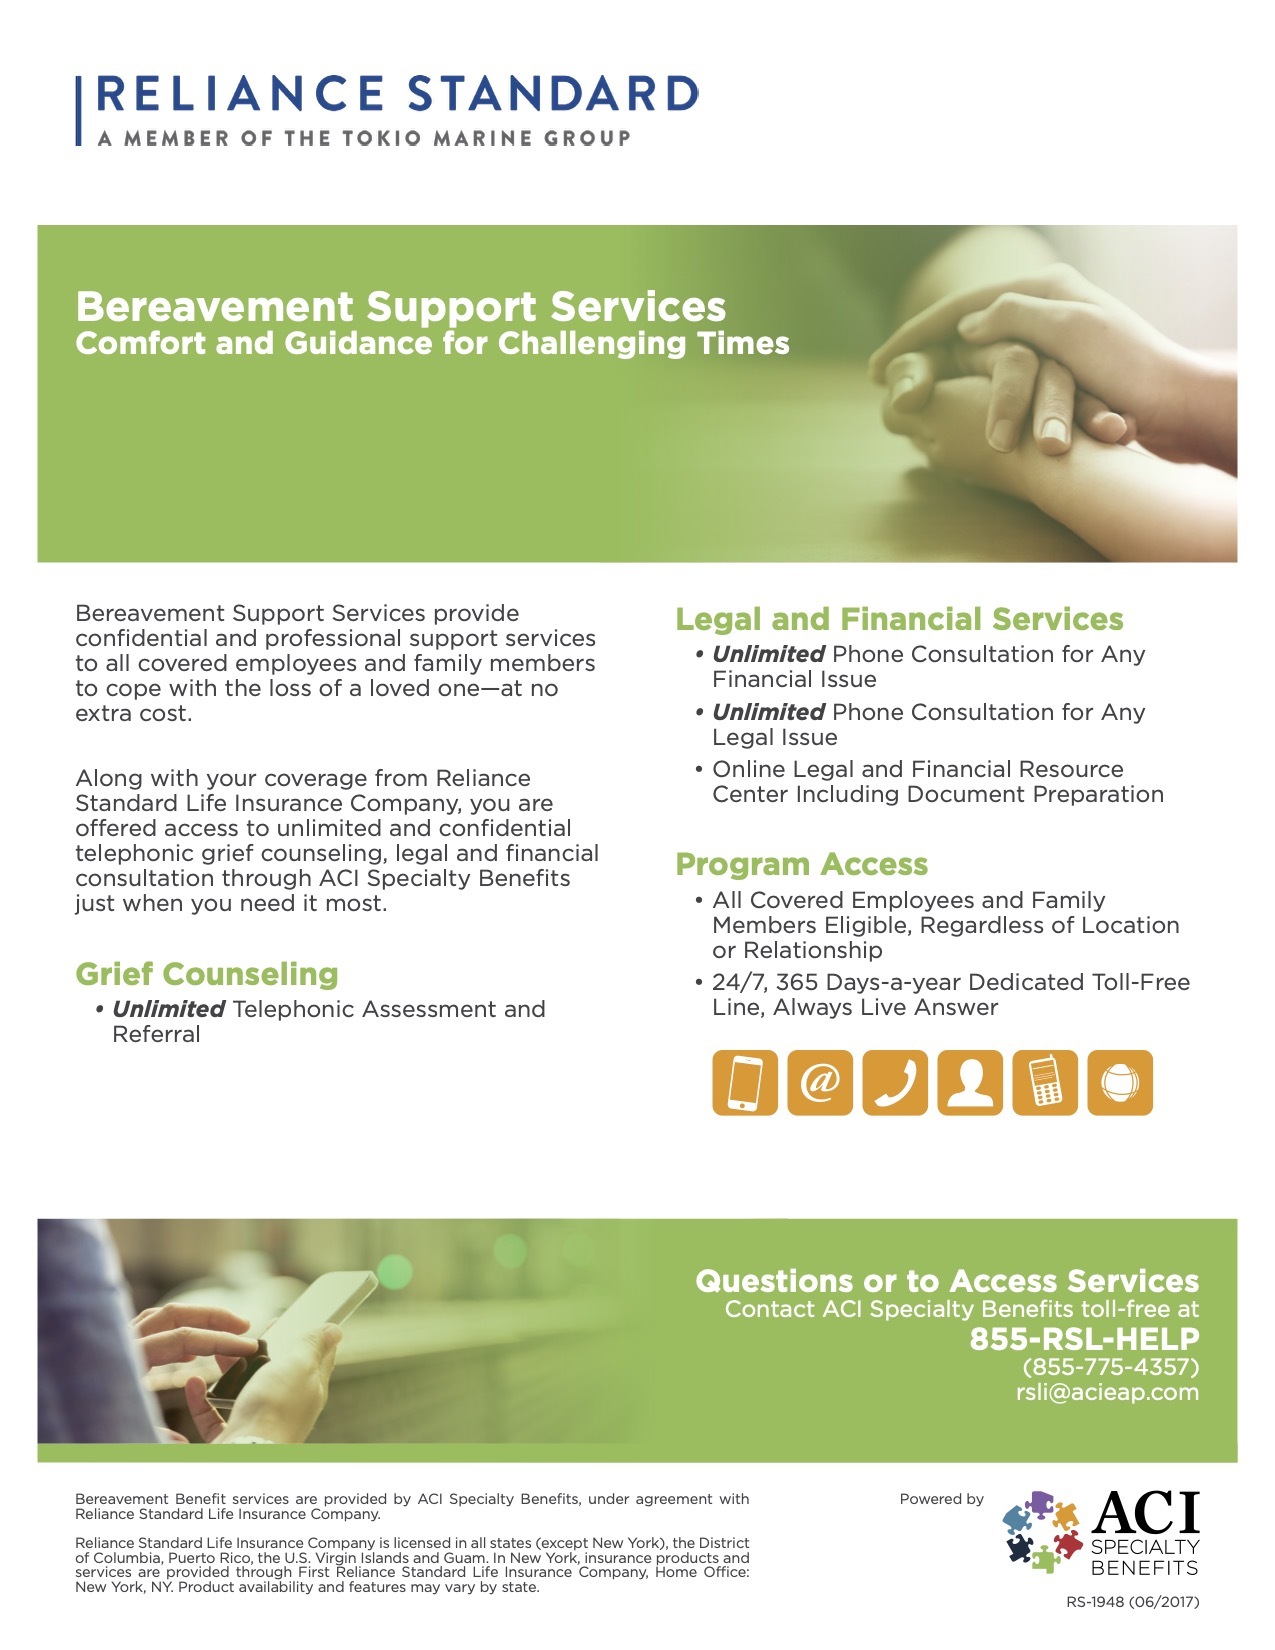 Bereavement Support Services